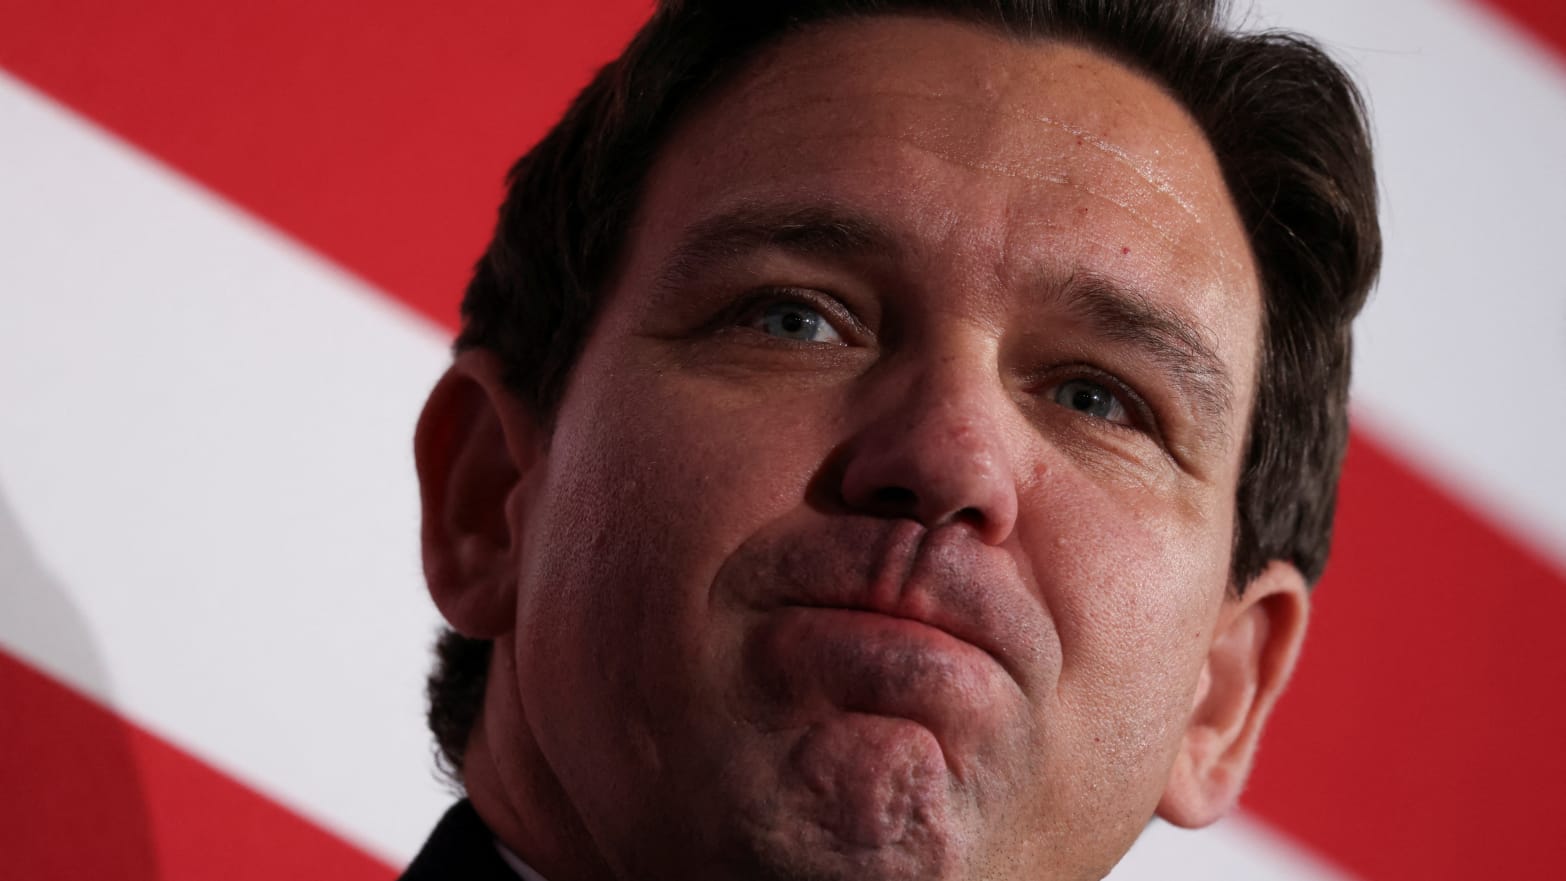 Republican presidential candidate and Florida Governor Ron DeSantis gestures during a campaign event.